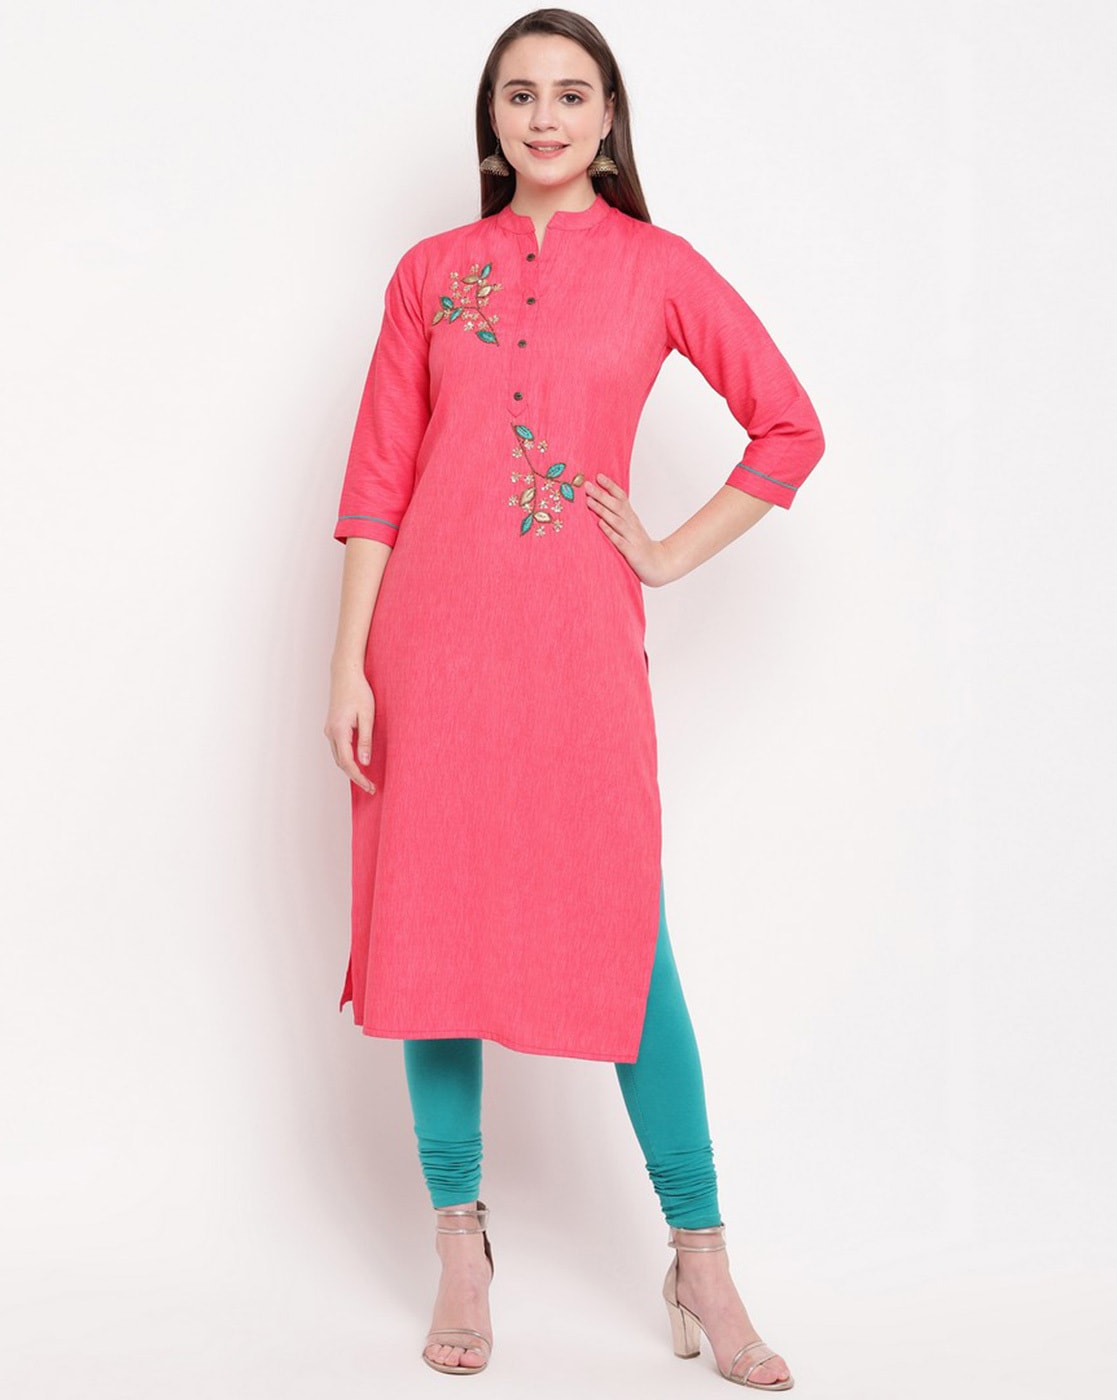 Which Colour Leggings Match With Pink Kurti Photo | International Society  of Precision Agriculture